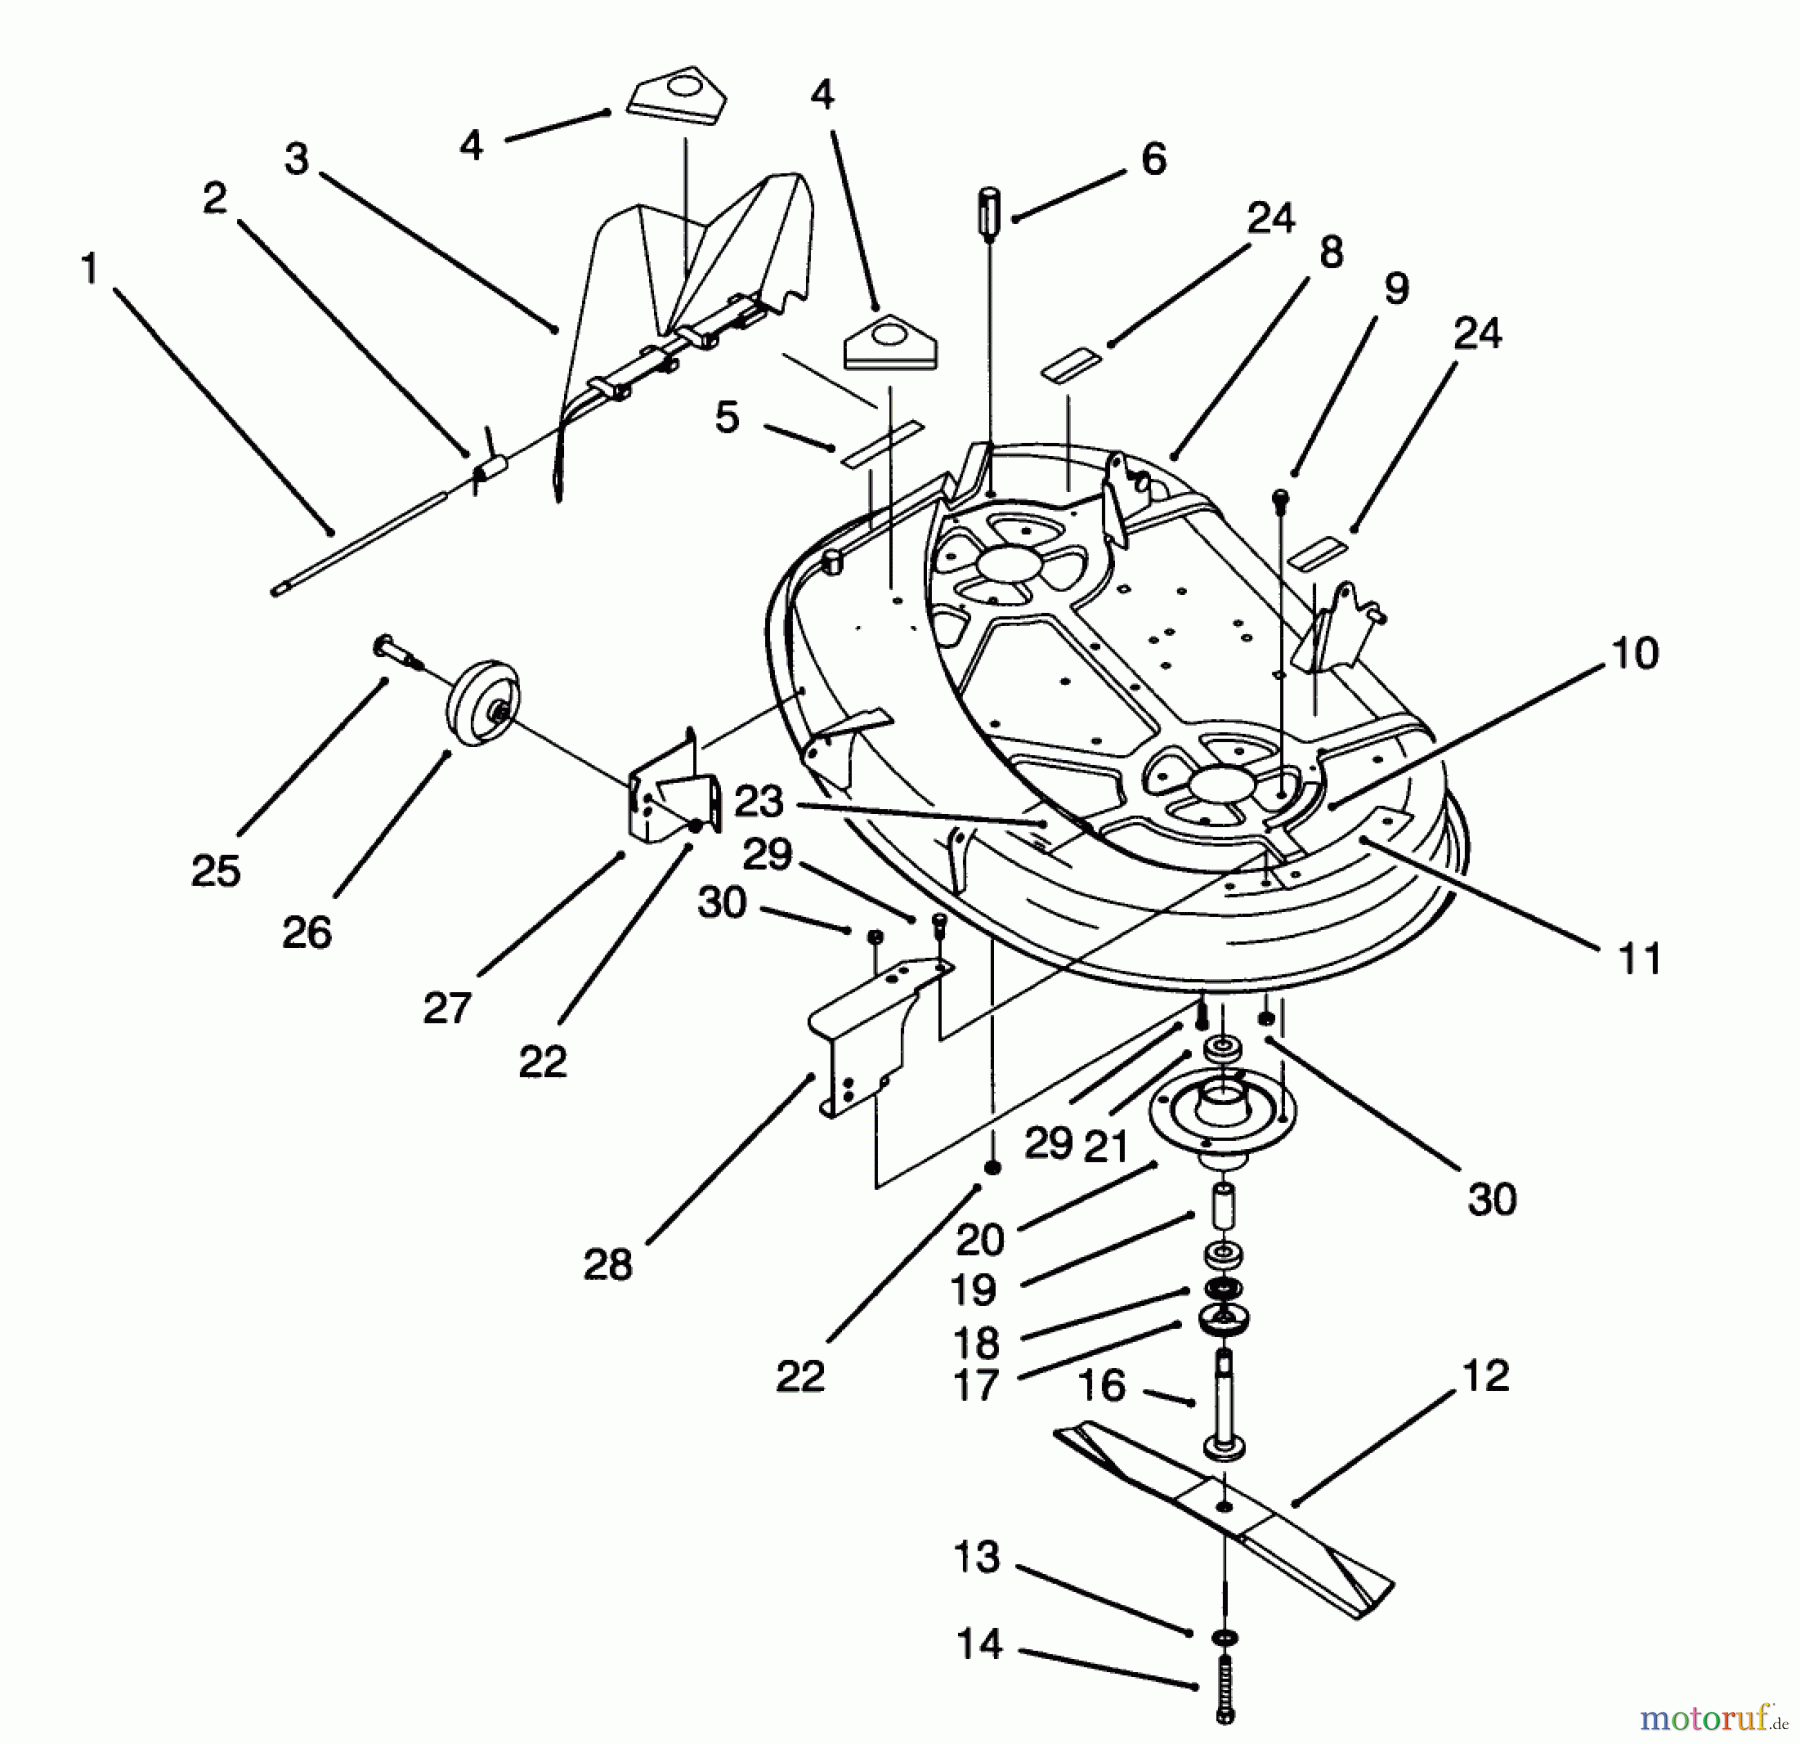  Toro Neu Mowers, Lawn & Garden Tractor Seite 1 71191 (13-38HXL) - Toro 13-38HXL Lawn Tractor, 1995 (5900001-5910000) HOUSING & SPINDLE ASSEMBLY (38